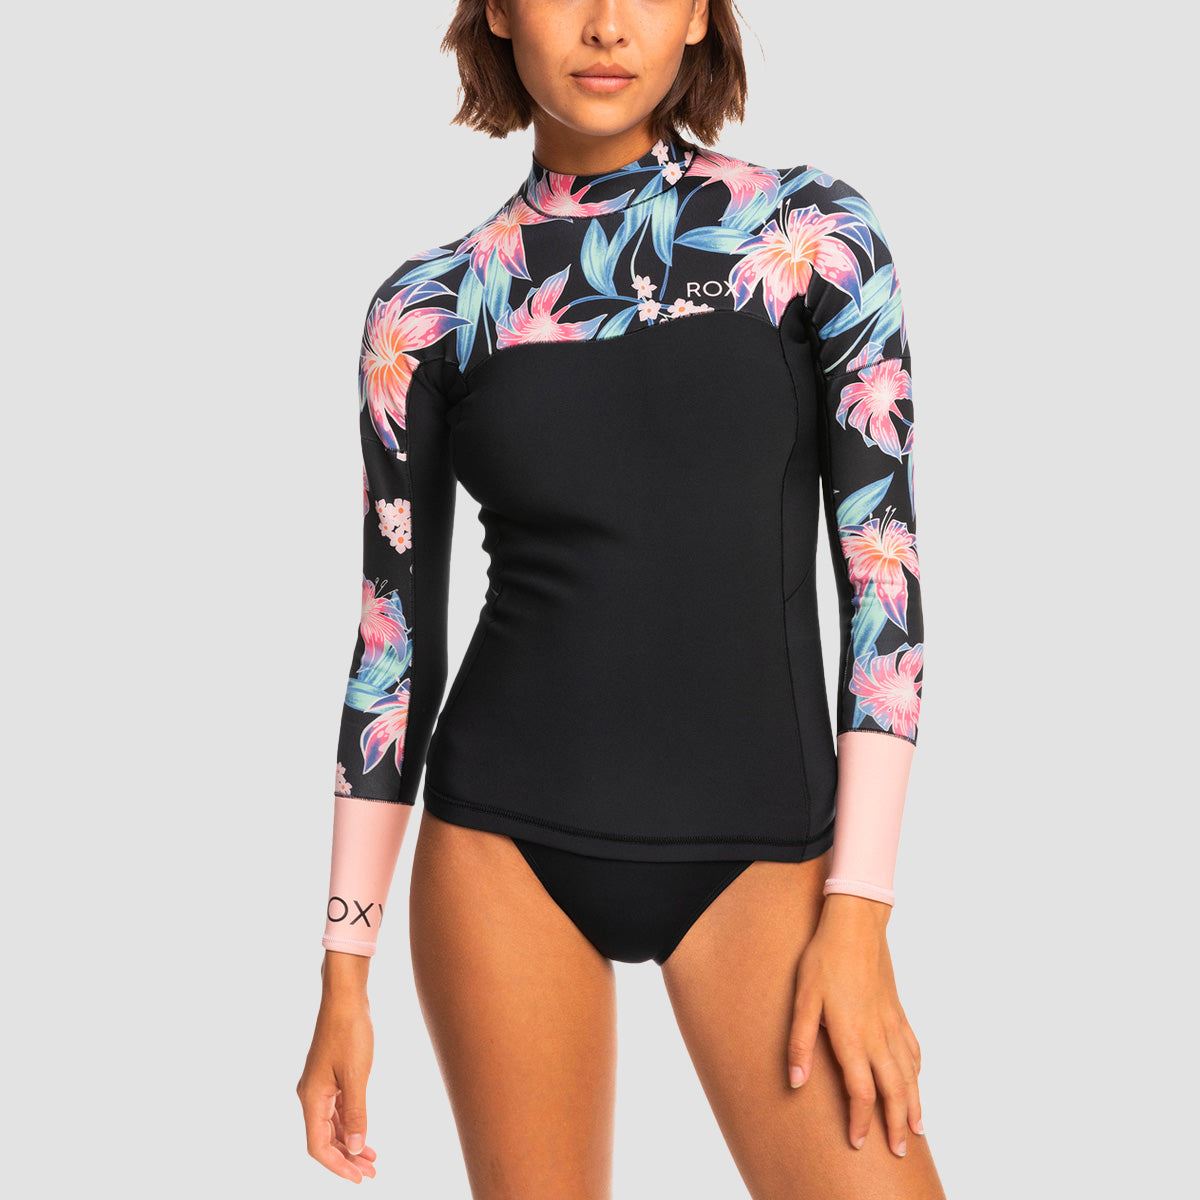 Roxy Swell Series 1mm Longsleeve Wetsuit Top Anthracite Paradise Found S - Womens